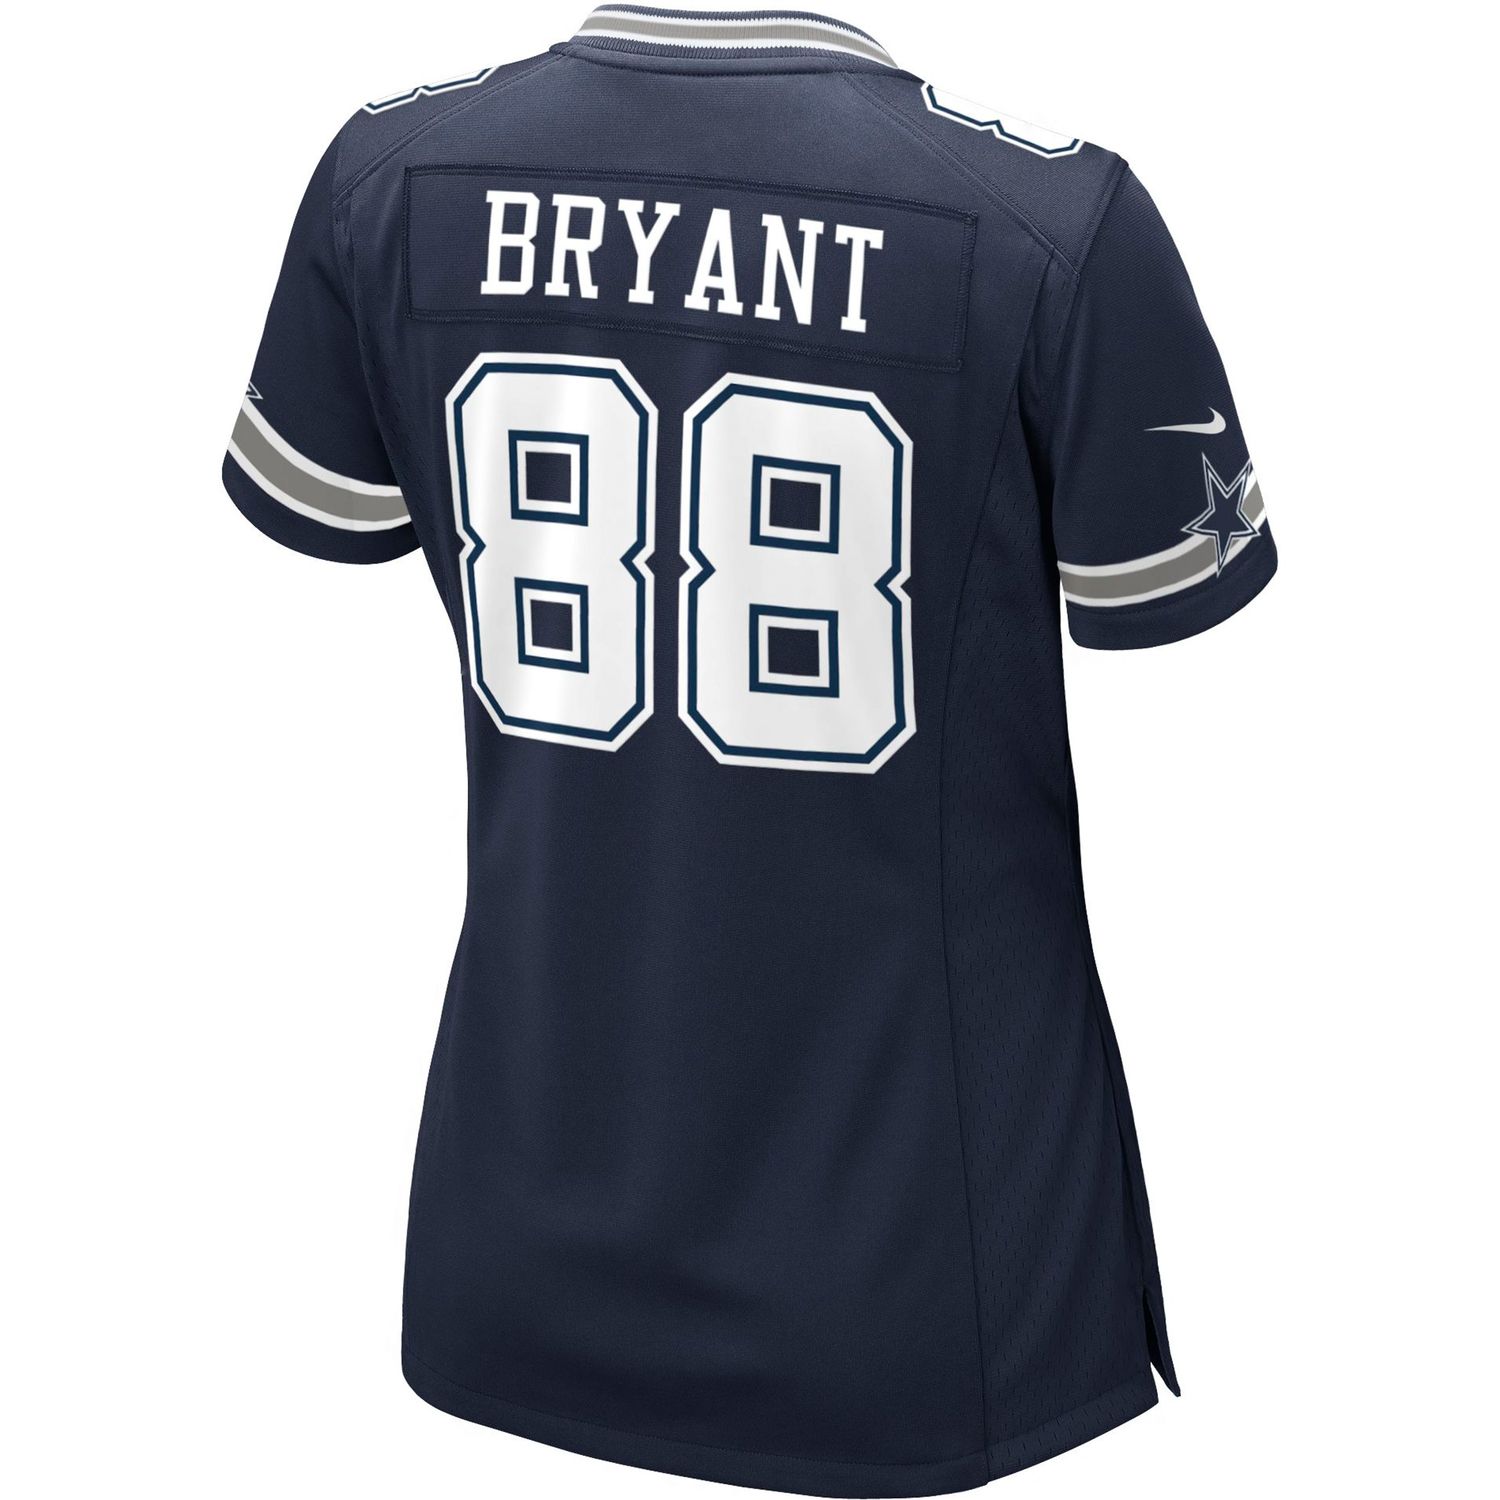 dez bryant womens jersey